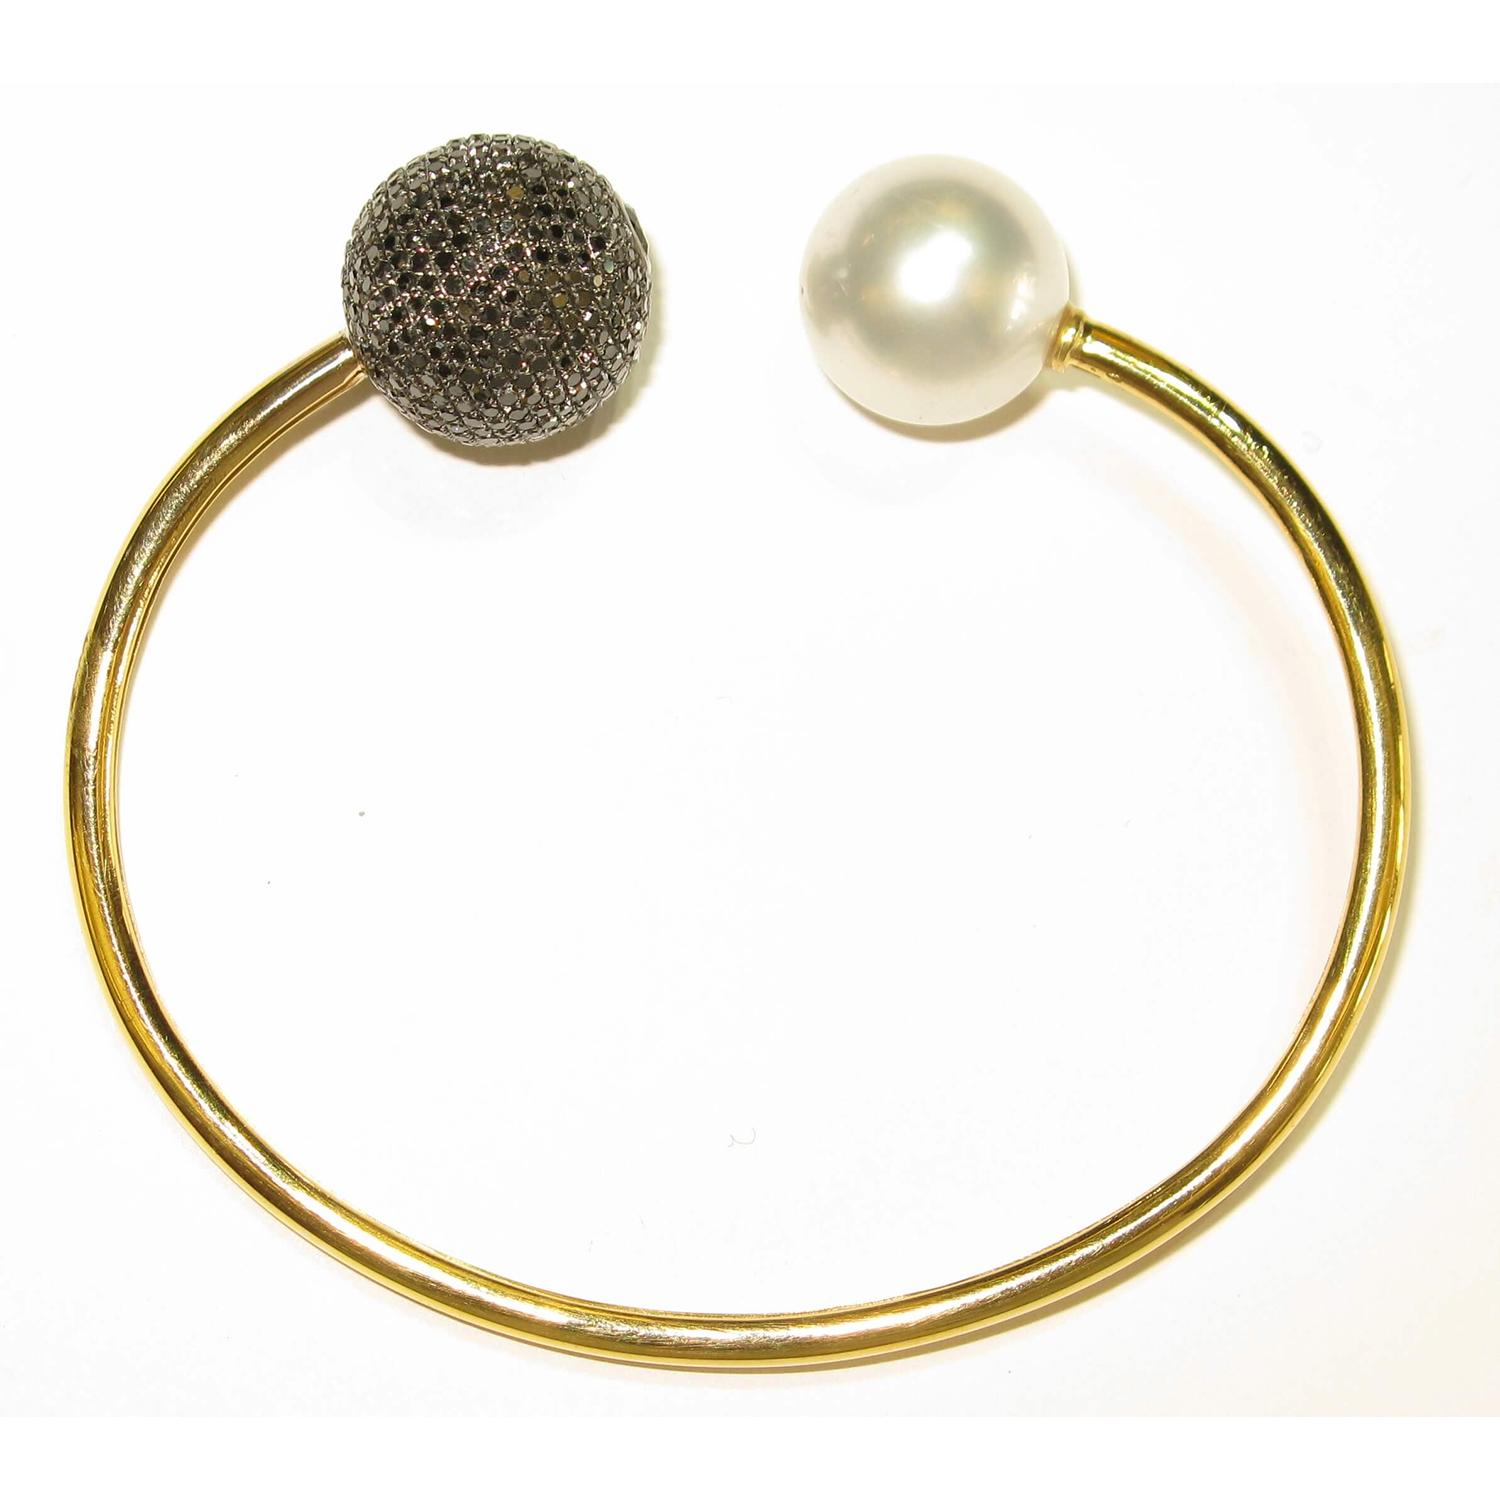 Mixed Cut Pearl & Pave Diamond Beads Bracelet Made In 18k Gold